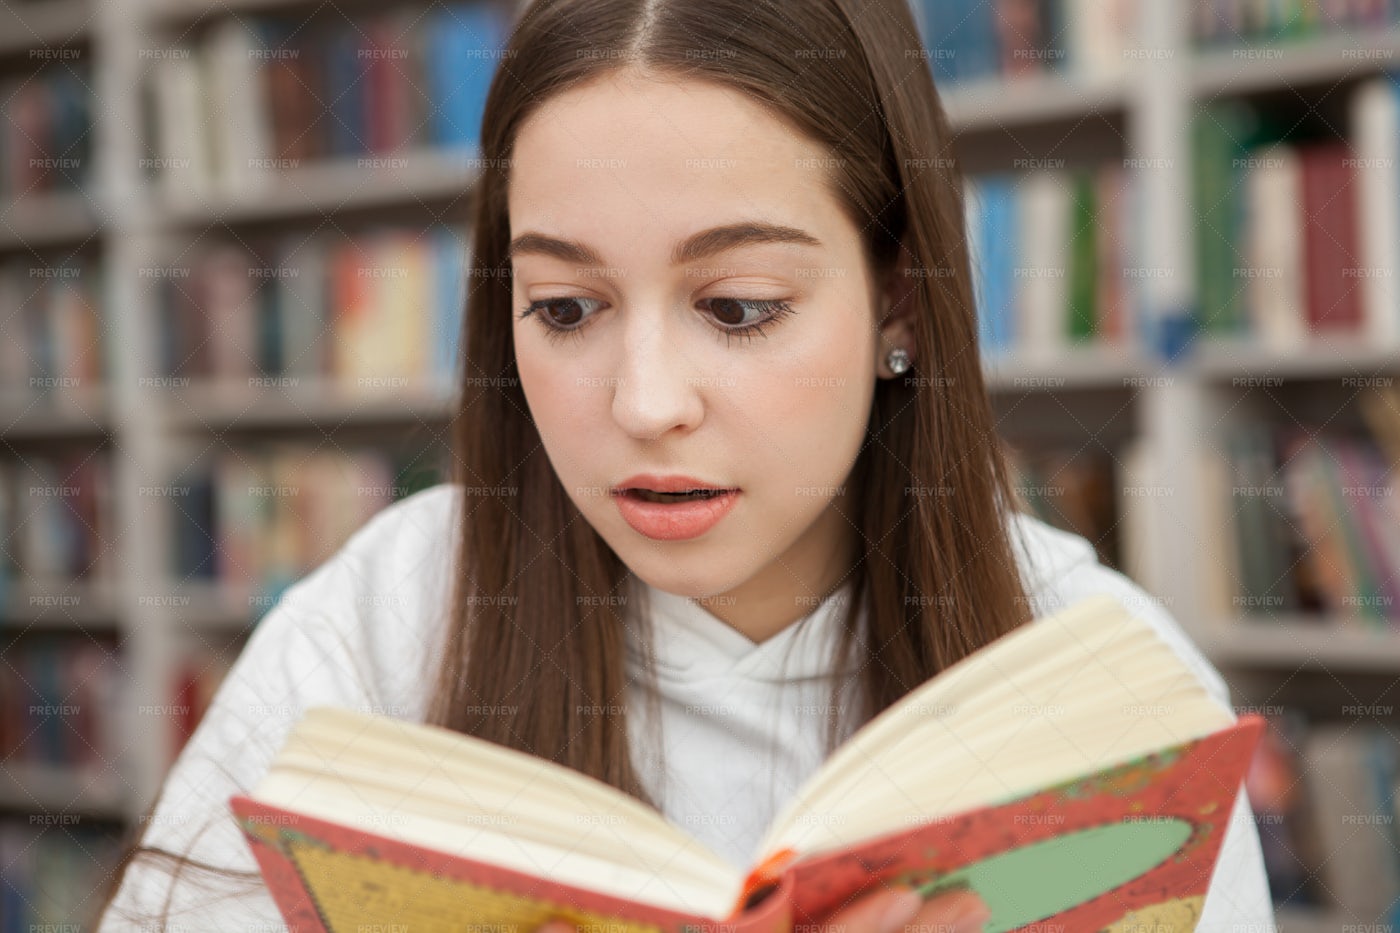 Concentrating While Reading: Stock Photos